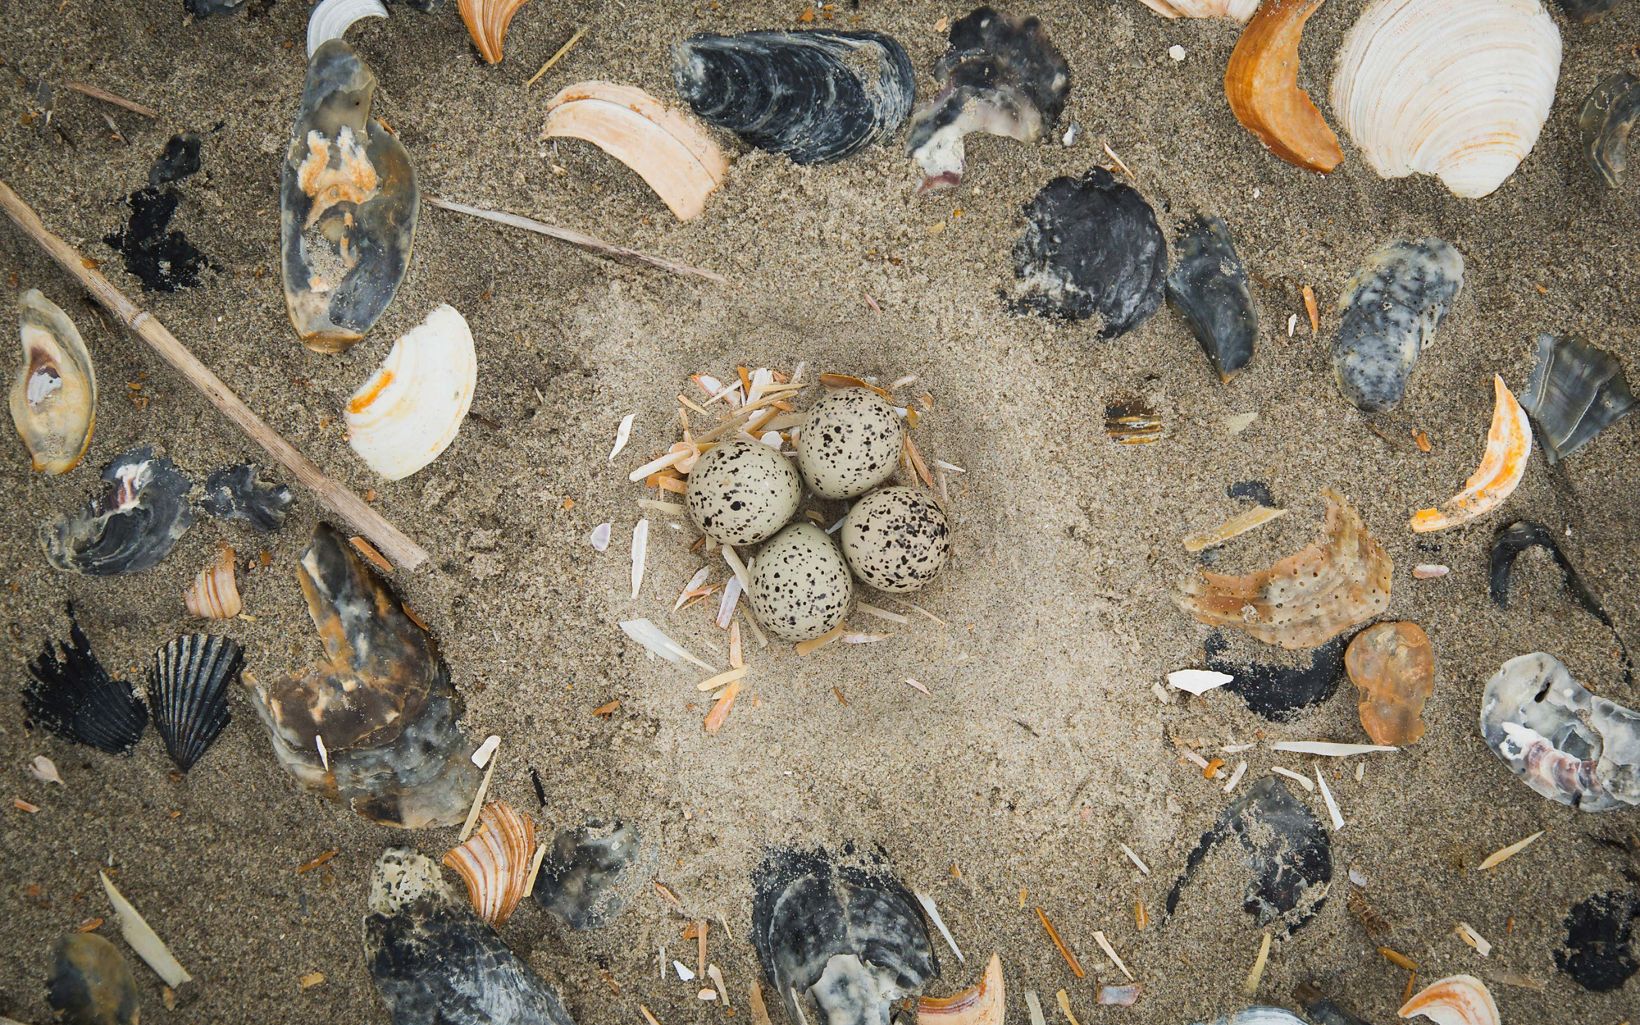 Four speckled eggs surrounded by mussel, clam and scallop shells in the sand.